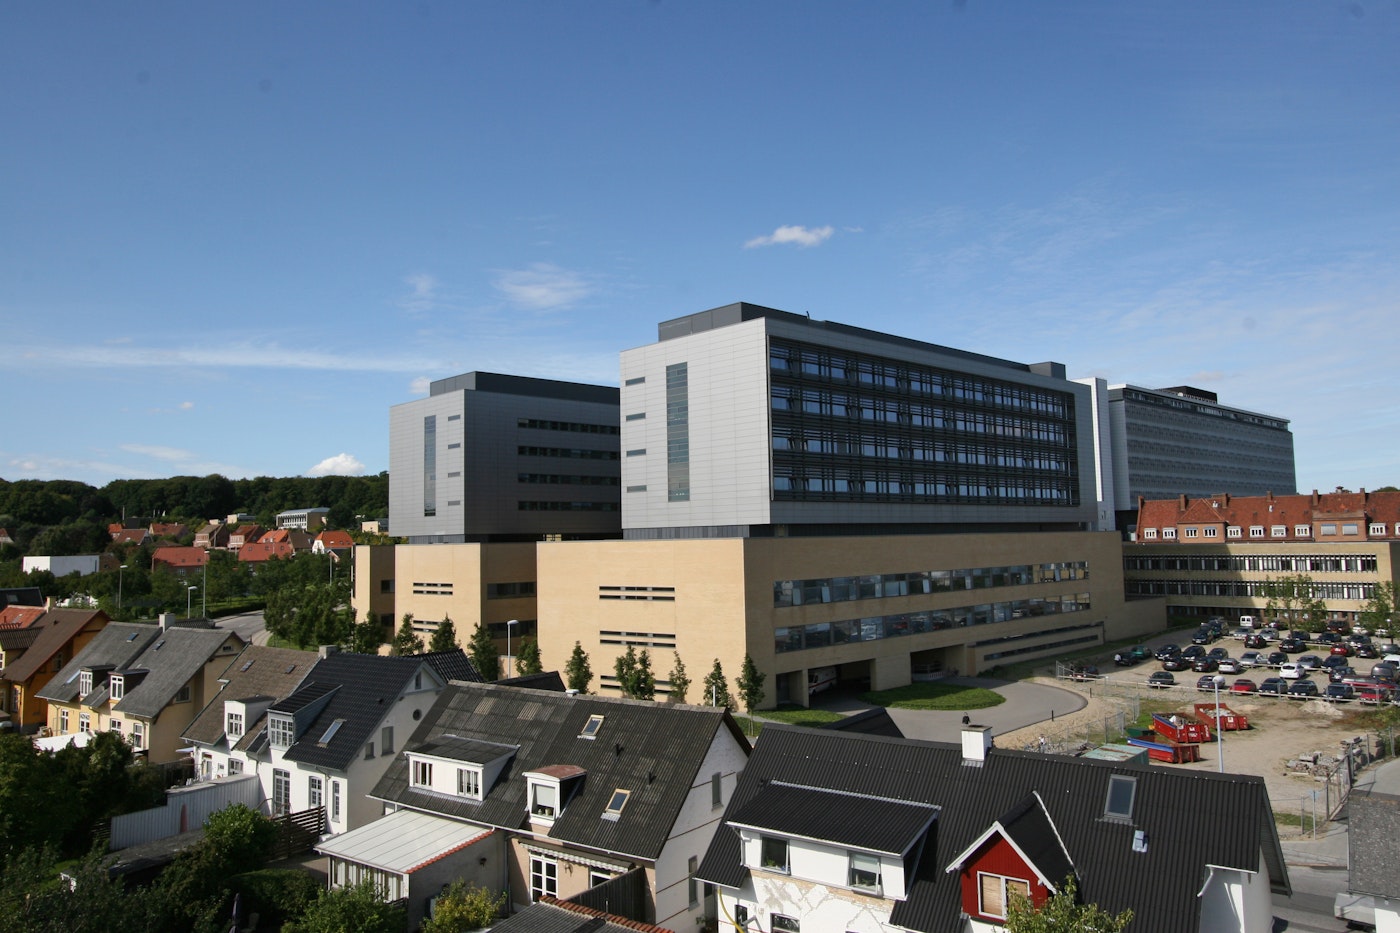 The Medical Building, Aalborg Hospital